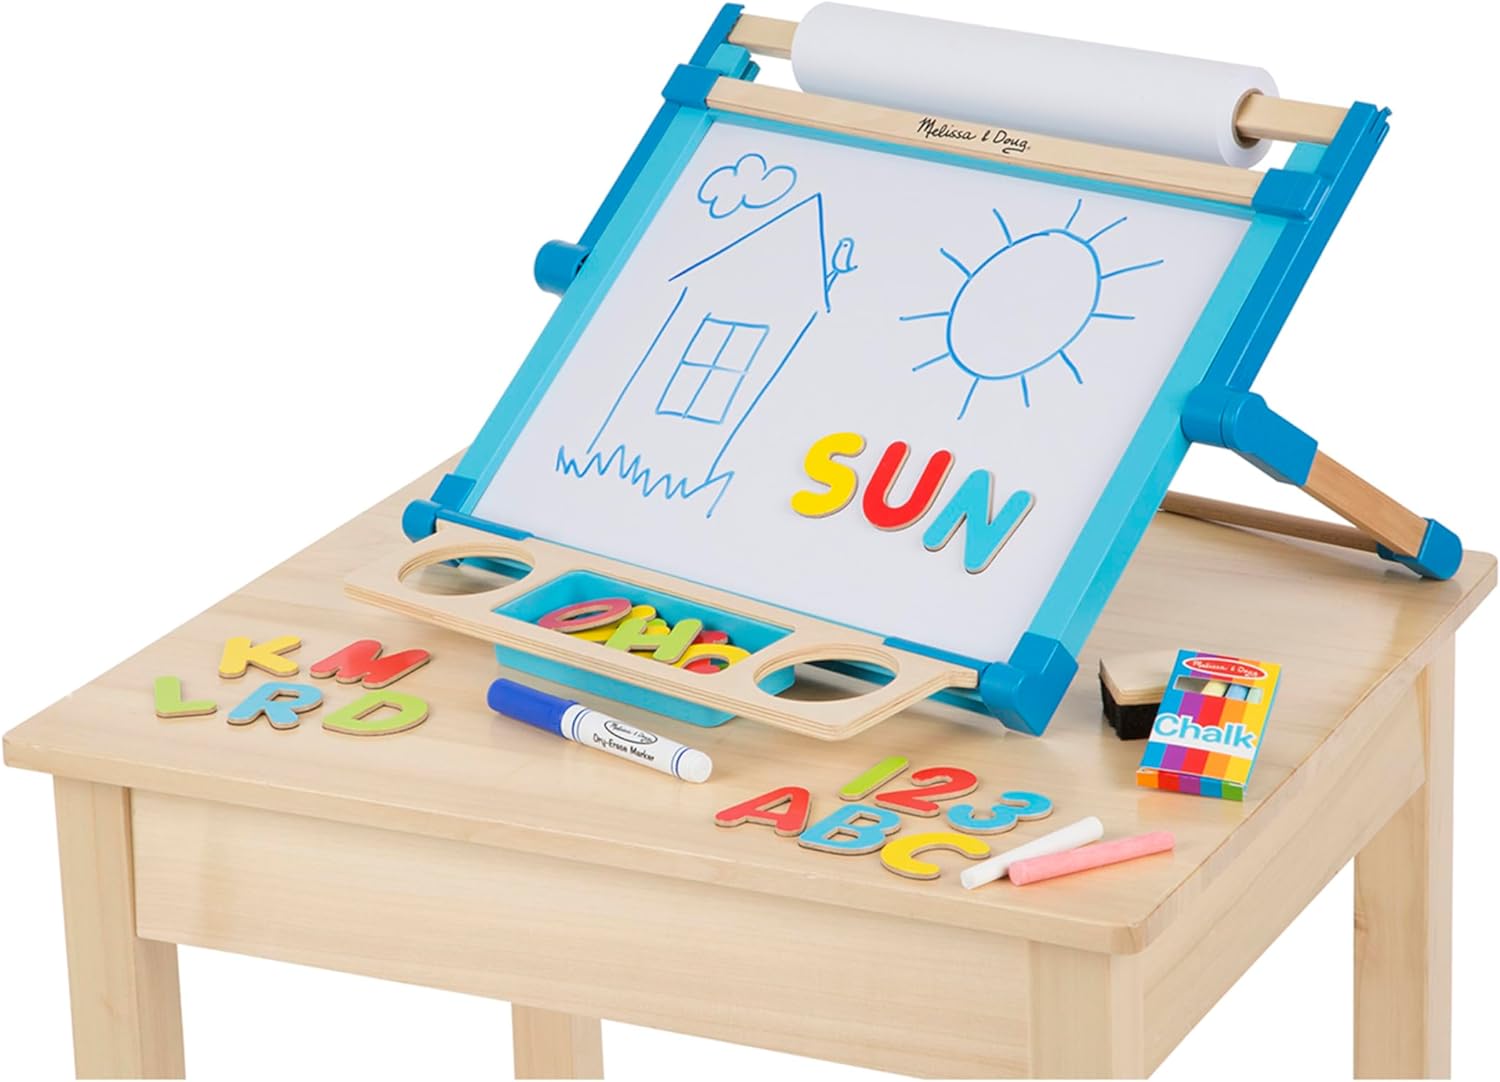 Melissa & Doug Deluxe Double-Sided Tabletop Easel (Arts & Crafts, 42 Pieces, 17.5” H x 20.75” W x 2.75” L, Great Gift for Girls and Boys - Best for 3, 4, 5 Year Olds and Up),Gold